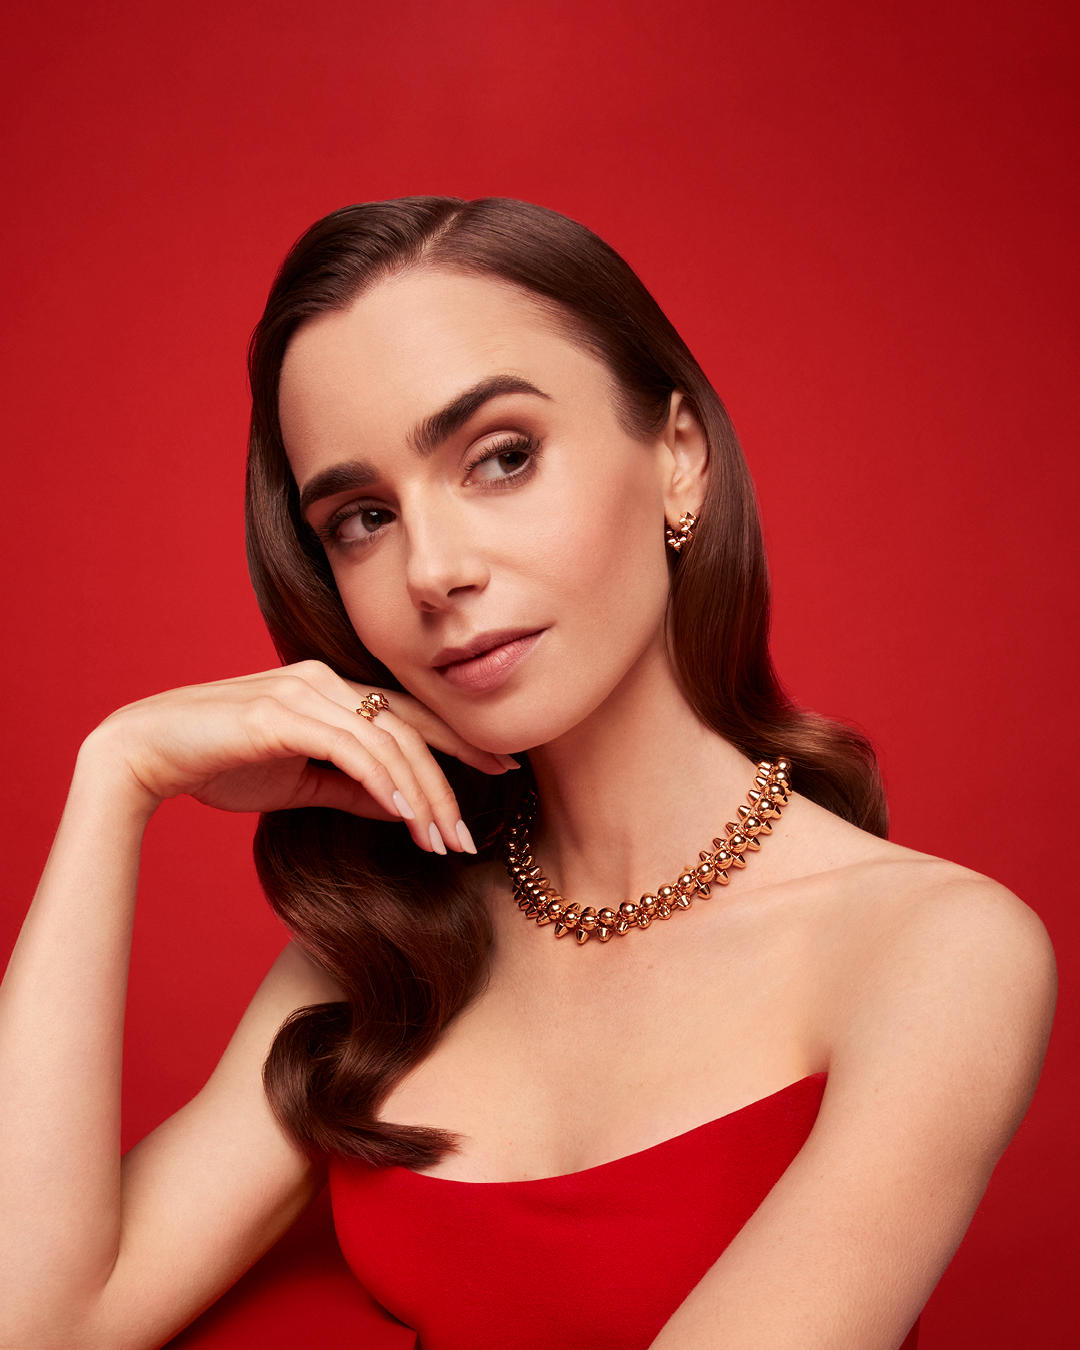 image  1 Cartier Official - Lily Collins shines in the refined duality of the #ClashdeCartier collection